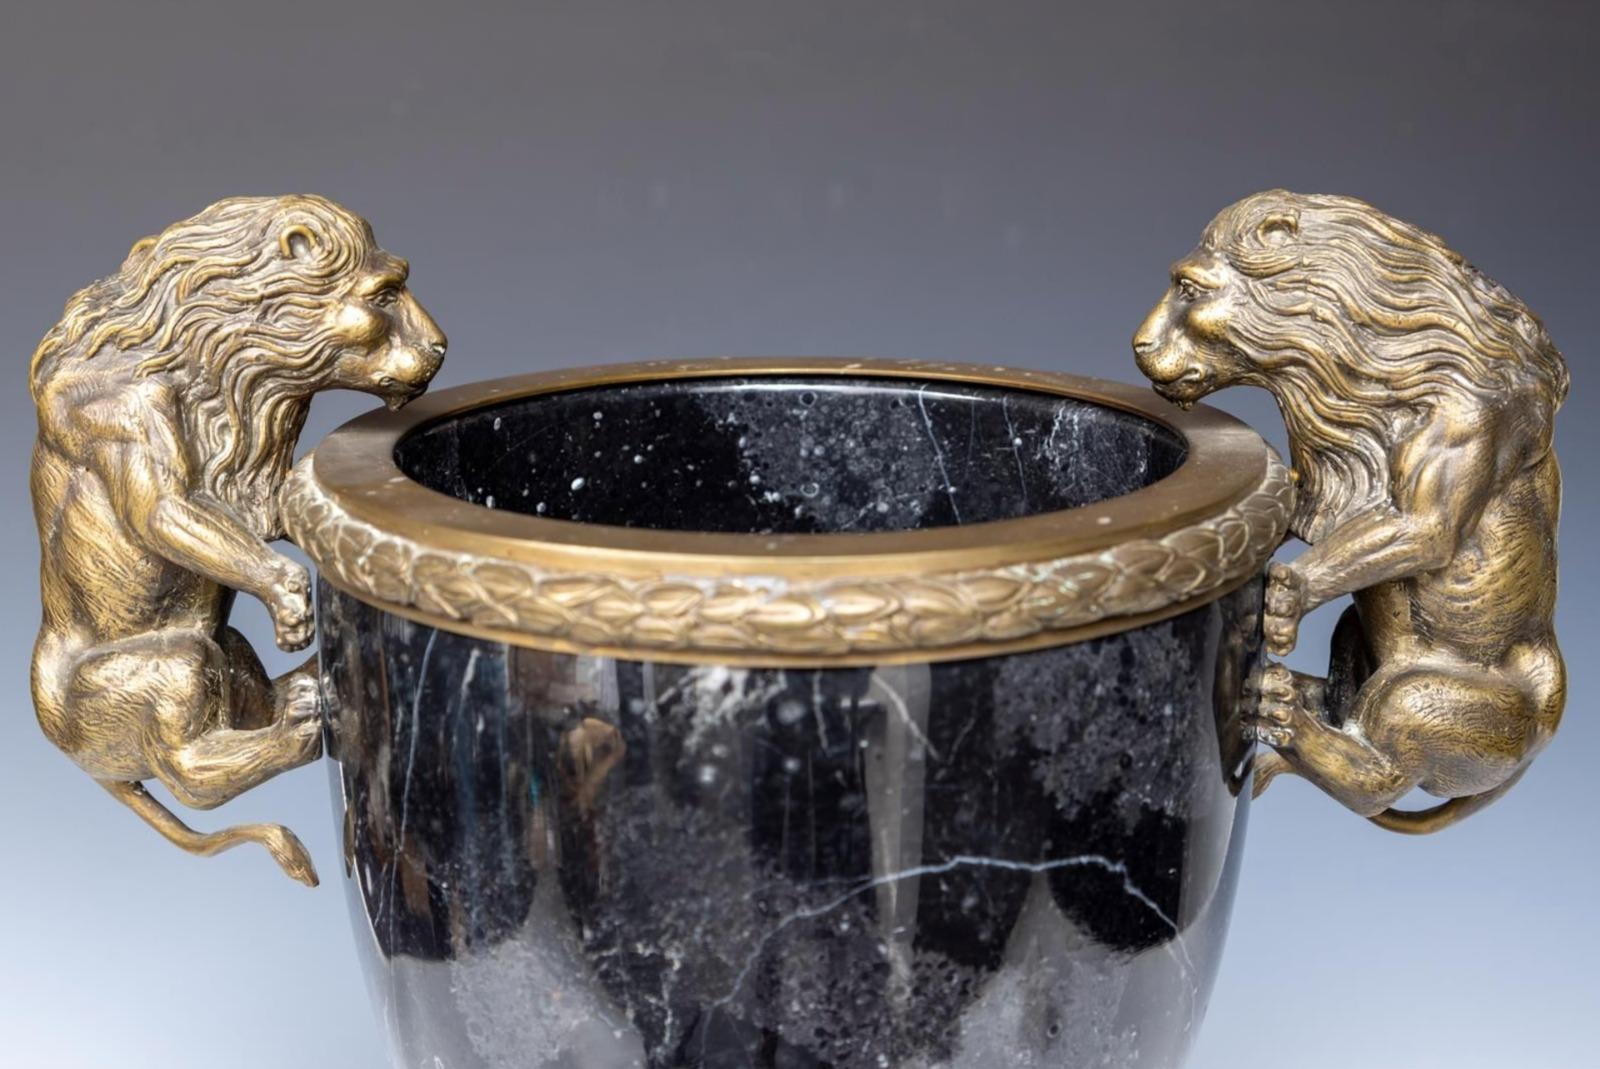 Important Napoleon III Vase, 19th century
A black marble casette with bronze mounts in the shape of lions, circa 1860. 
H.: 45 cm.
Very good condition.